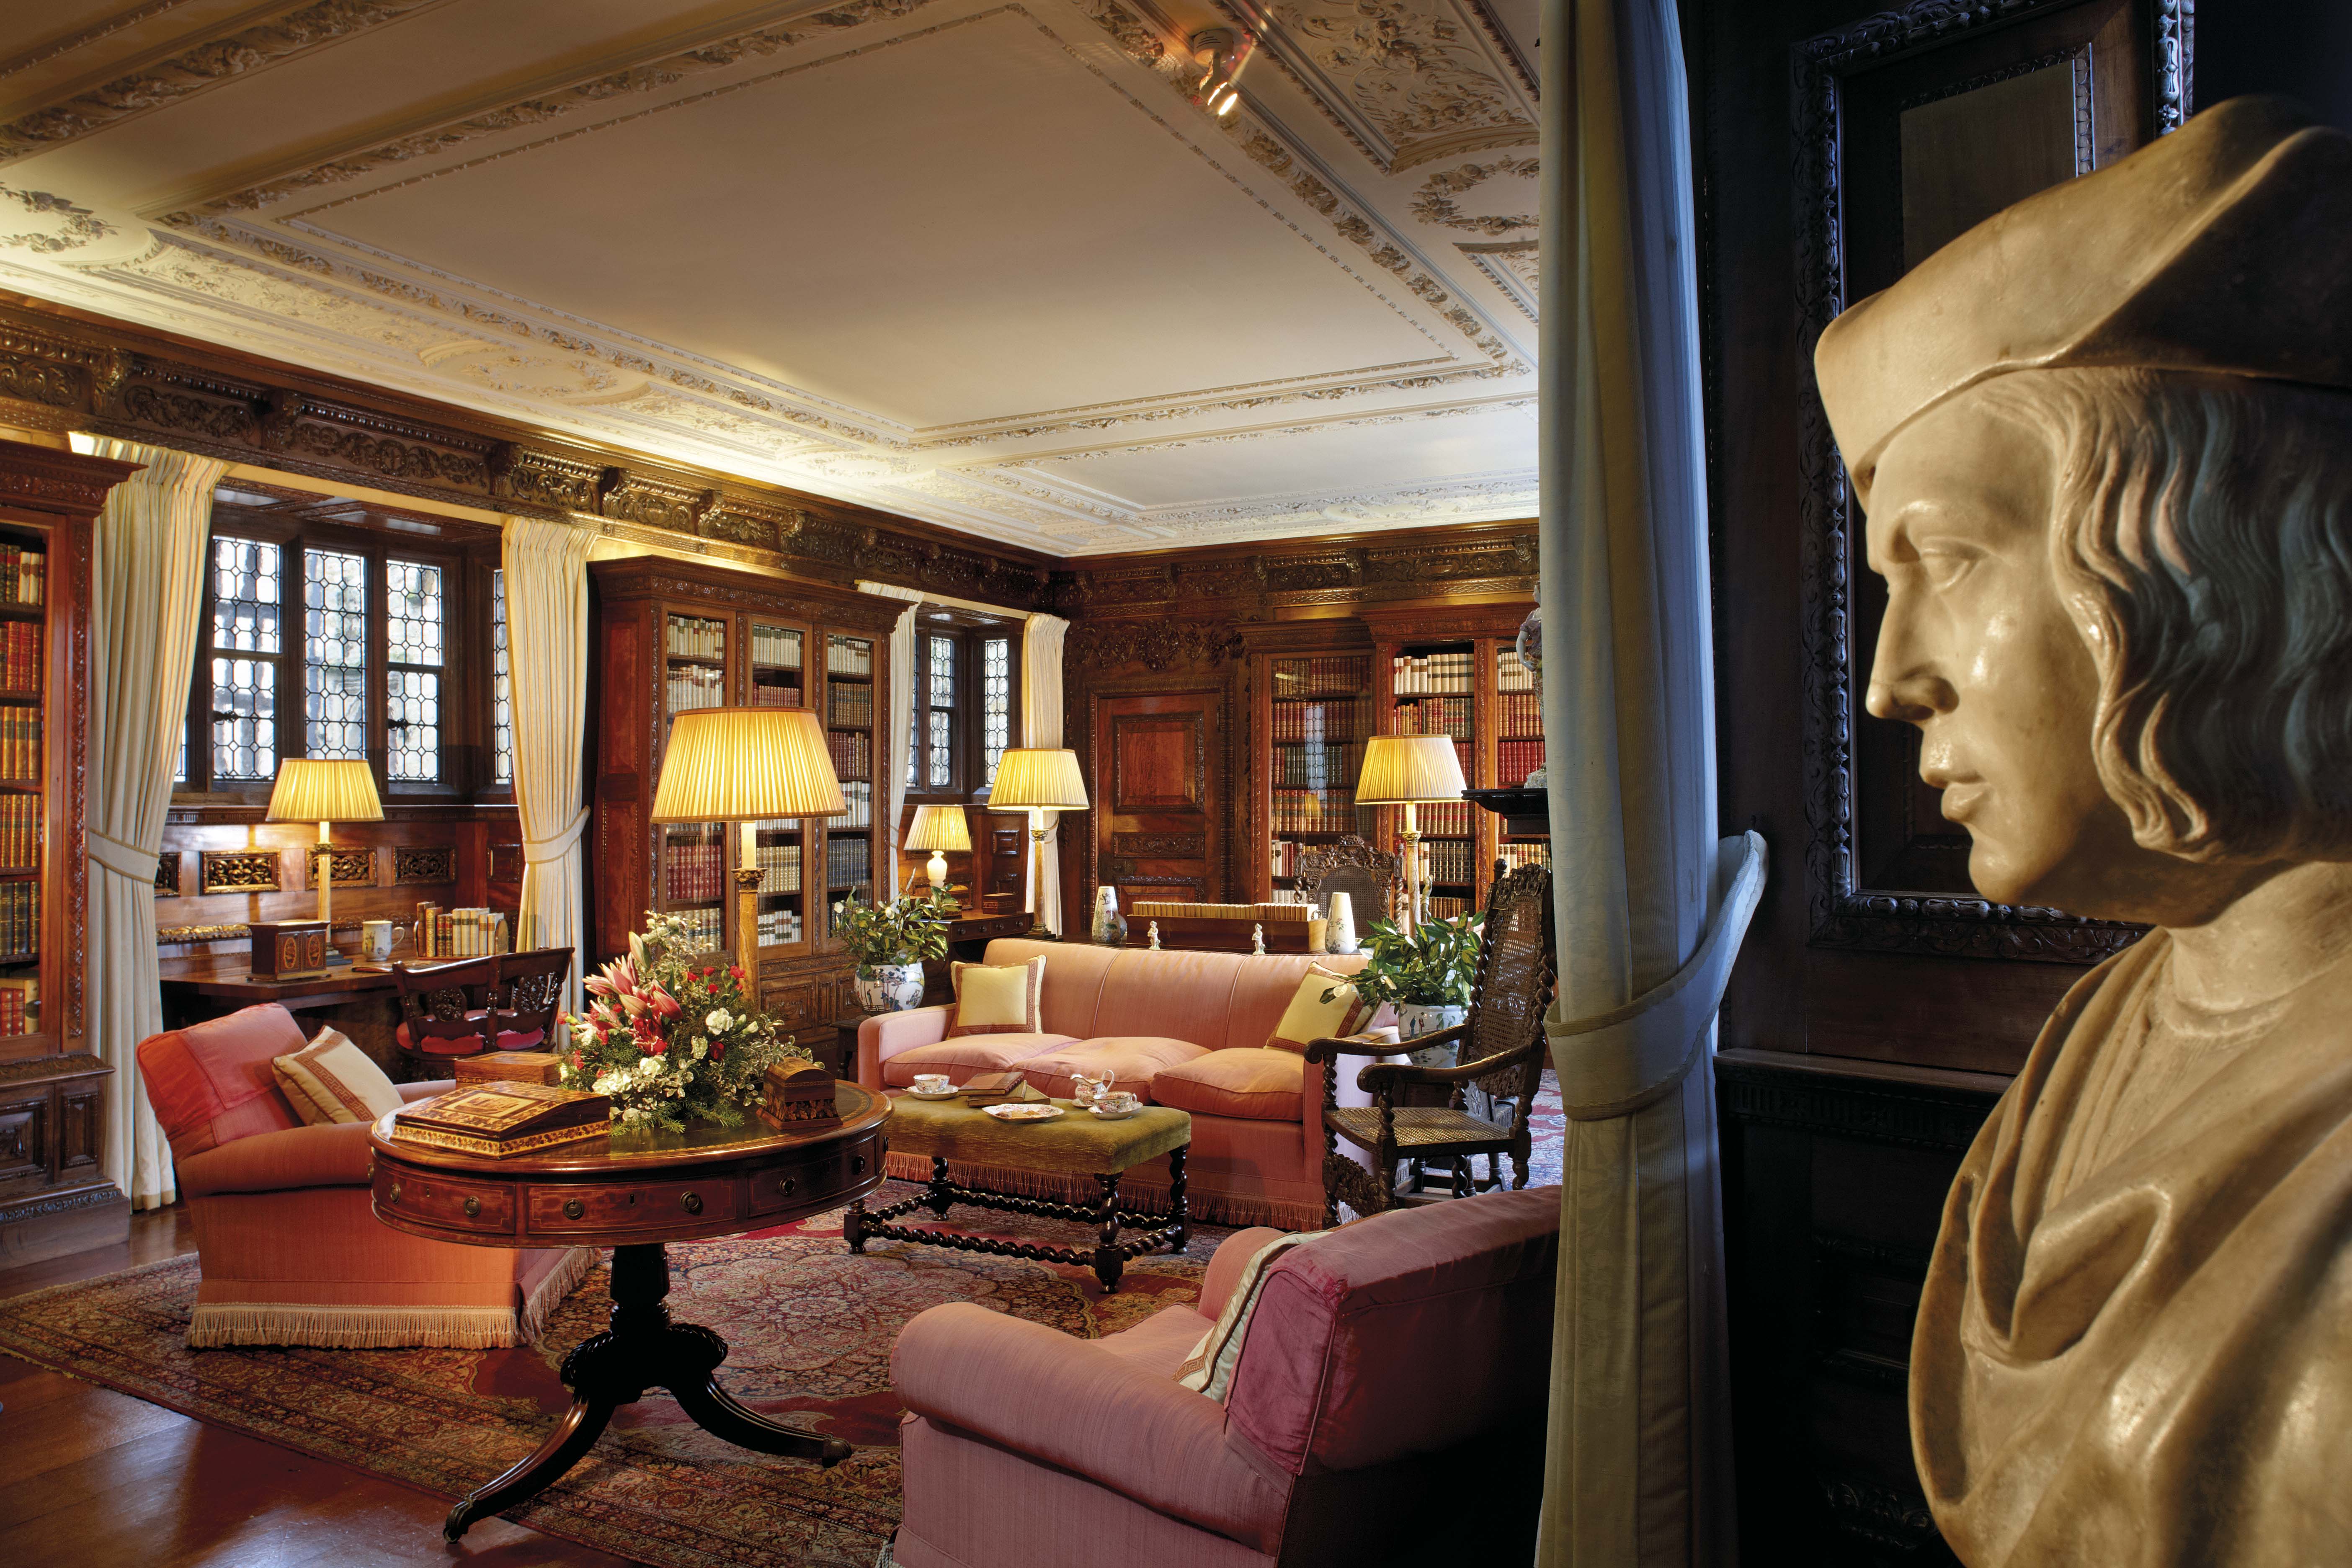 The library at Hever Castle